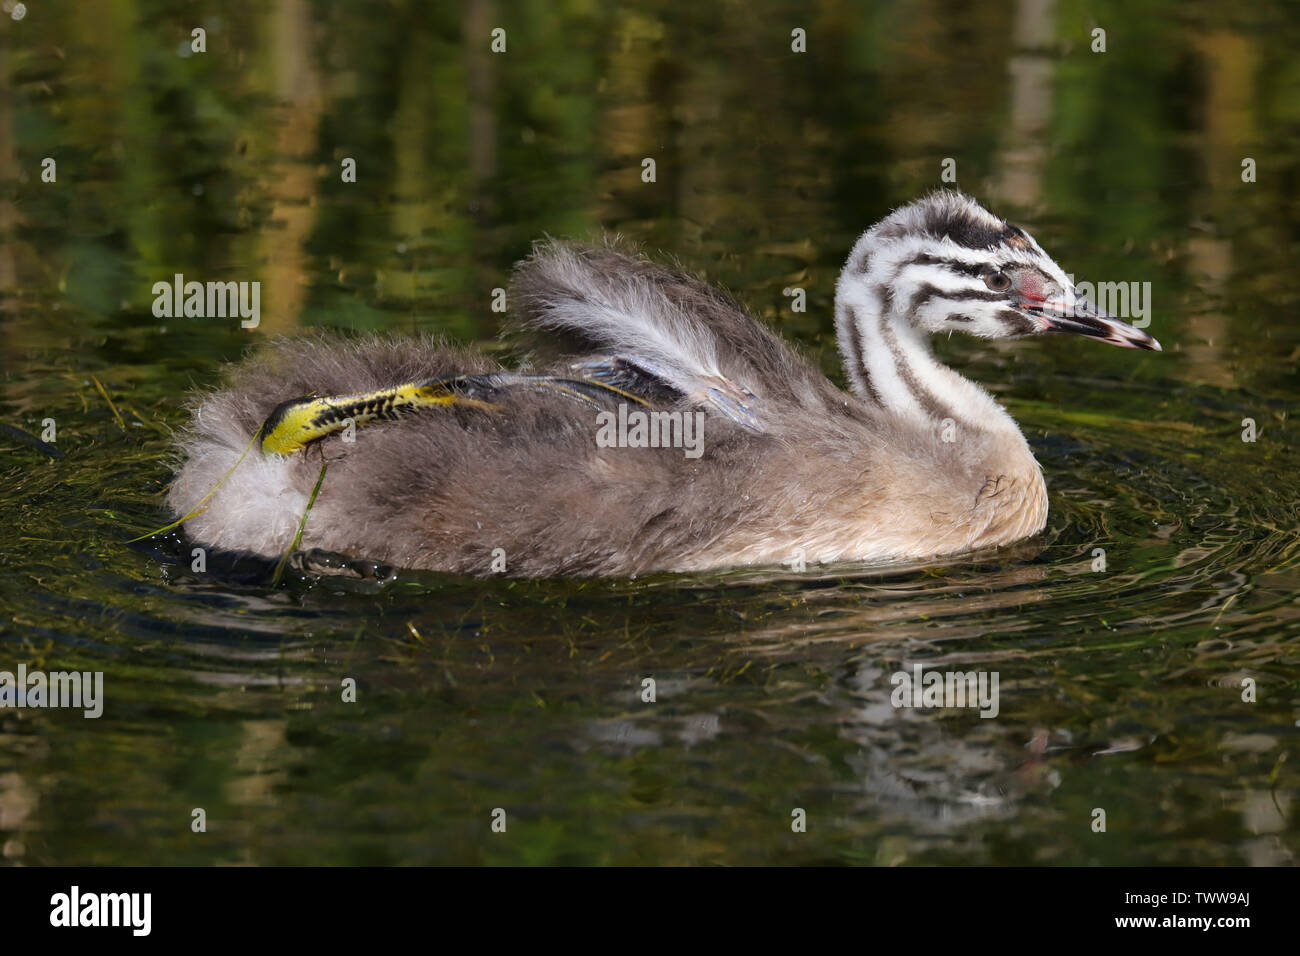 A Great Crested Grebe (Podiceps cristatus) chick swimming on a lake.  Taken at Cardiff Bay Nature Reserve, Cardiff, Wales, UK Stock Photo